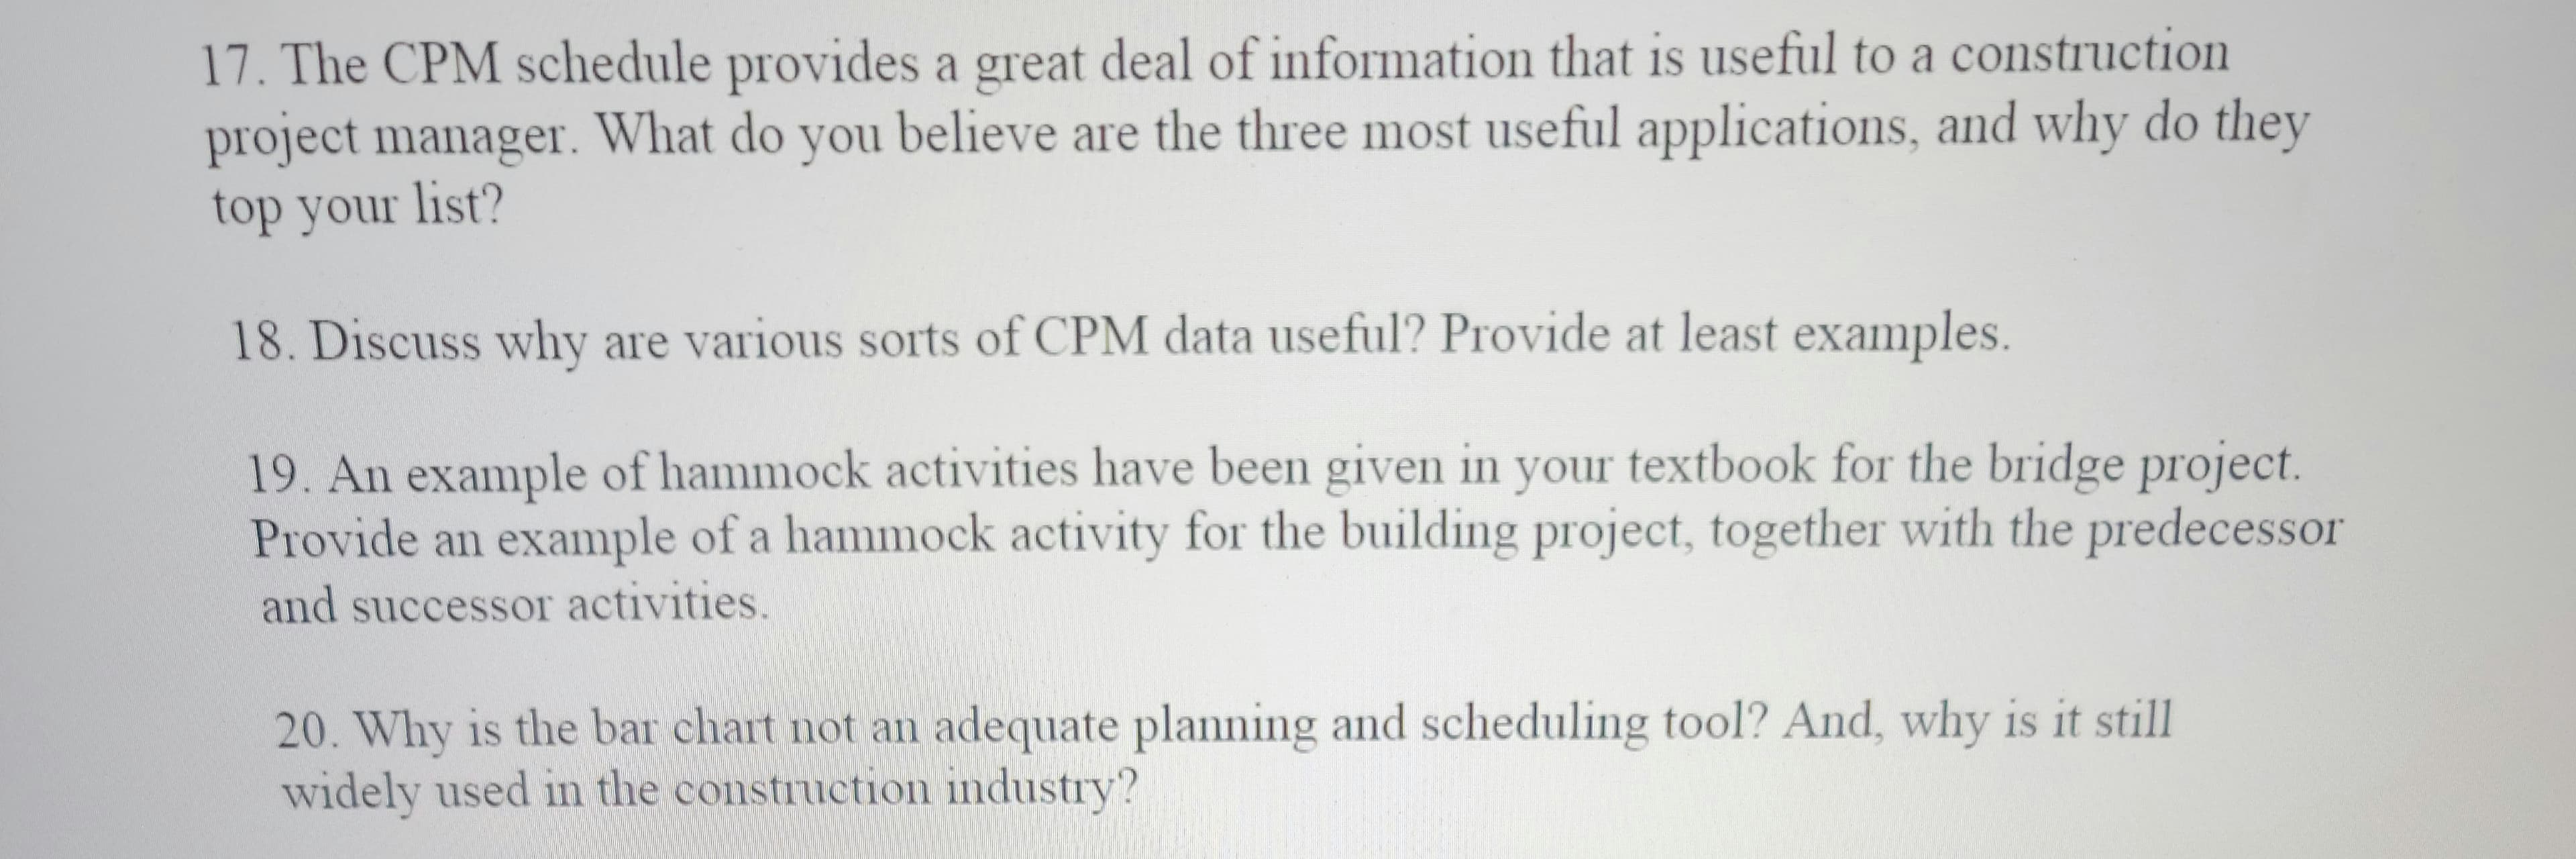 17. The CPM schedule provides a great deal of information that is useful to a construction
project manager. What do you believe are the three most useful applications, and why do they
top your list?
18. Discuss why are various sorts of CPM data useful? Provide at least examples.
19. An example of hammock activities have been given in your textbook for the bridge project.
Provide an example of a hammock activity for the building project, together with the predecessor
and successor activities.
20. Why is the bar chart not an adequate planning and scheduling tool? And, why is it still
widely used in the construction industry?